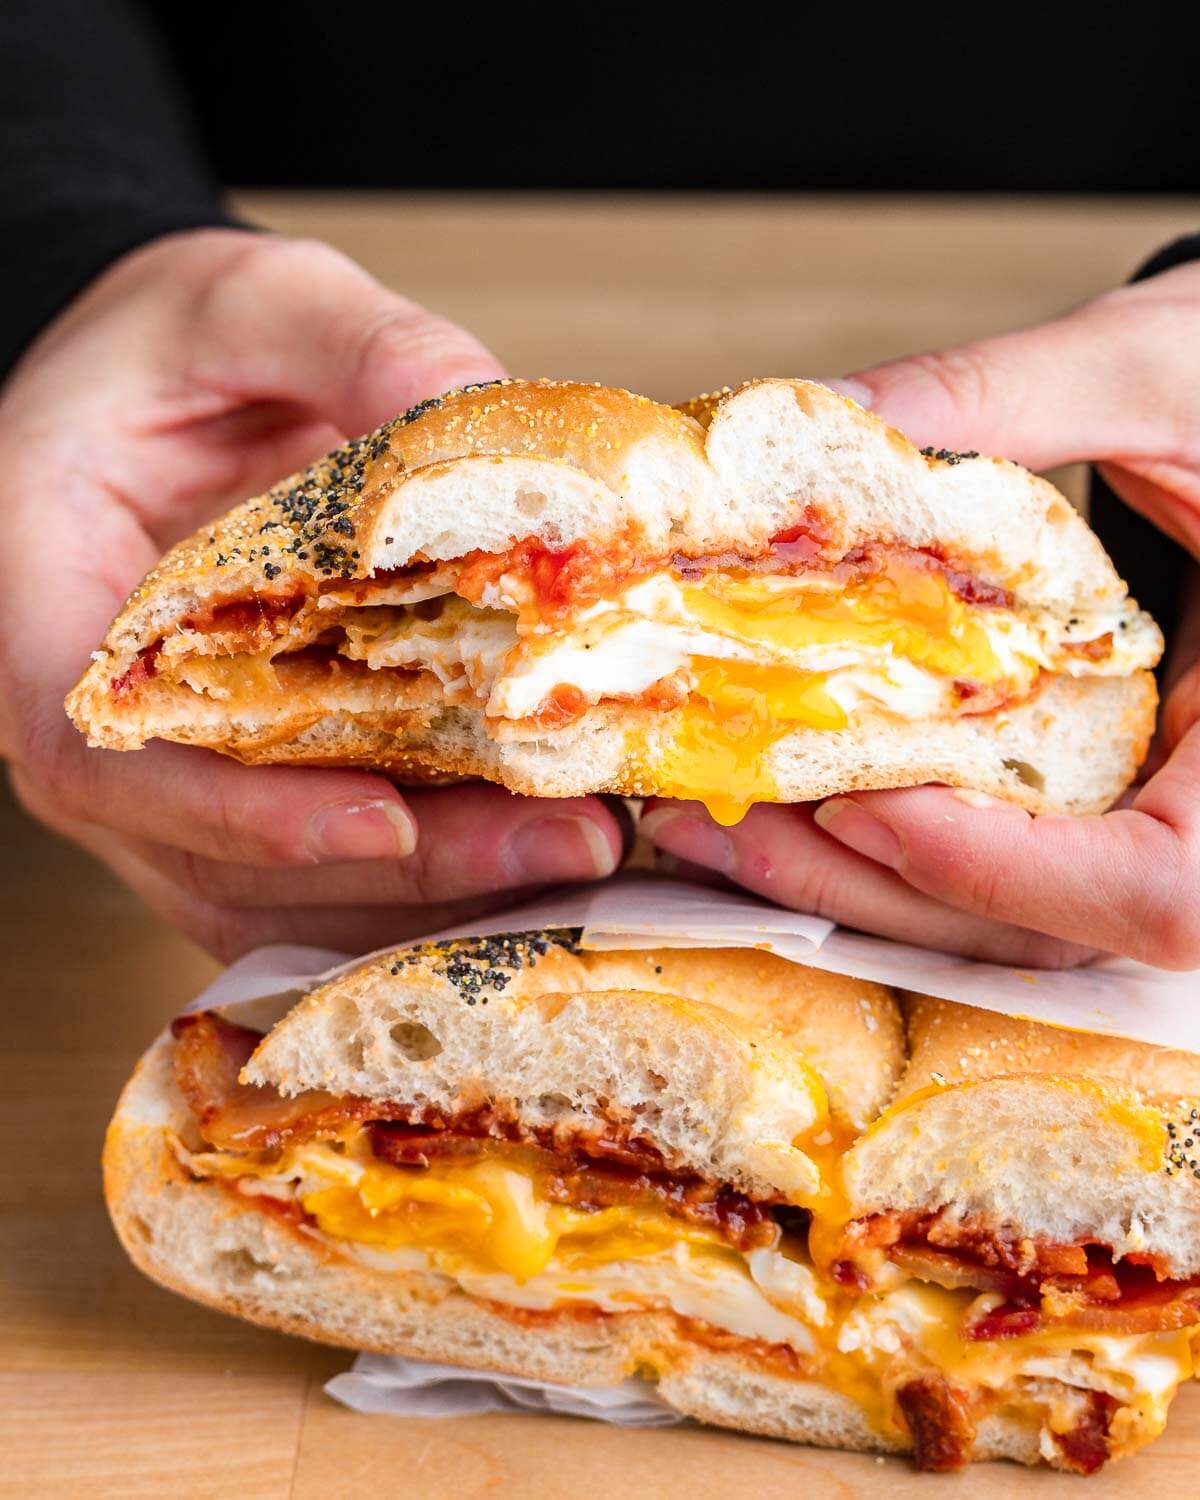 Hands holding half a bitten bacon egg and cheese sandwich.